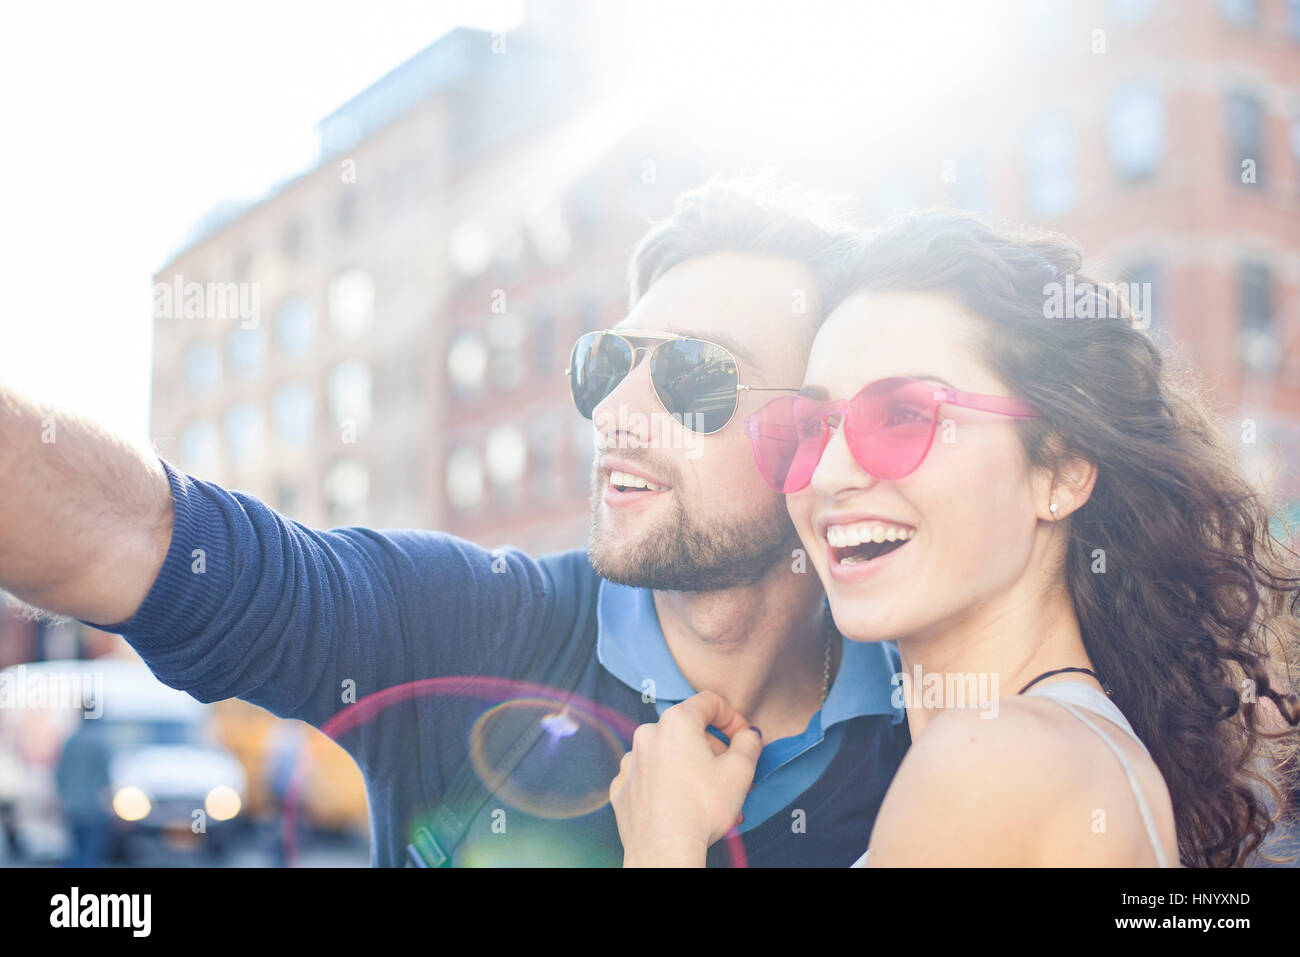 Couple sightseeing in city together Stock Photo